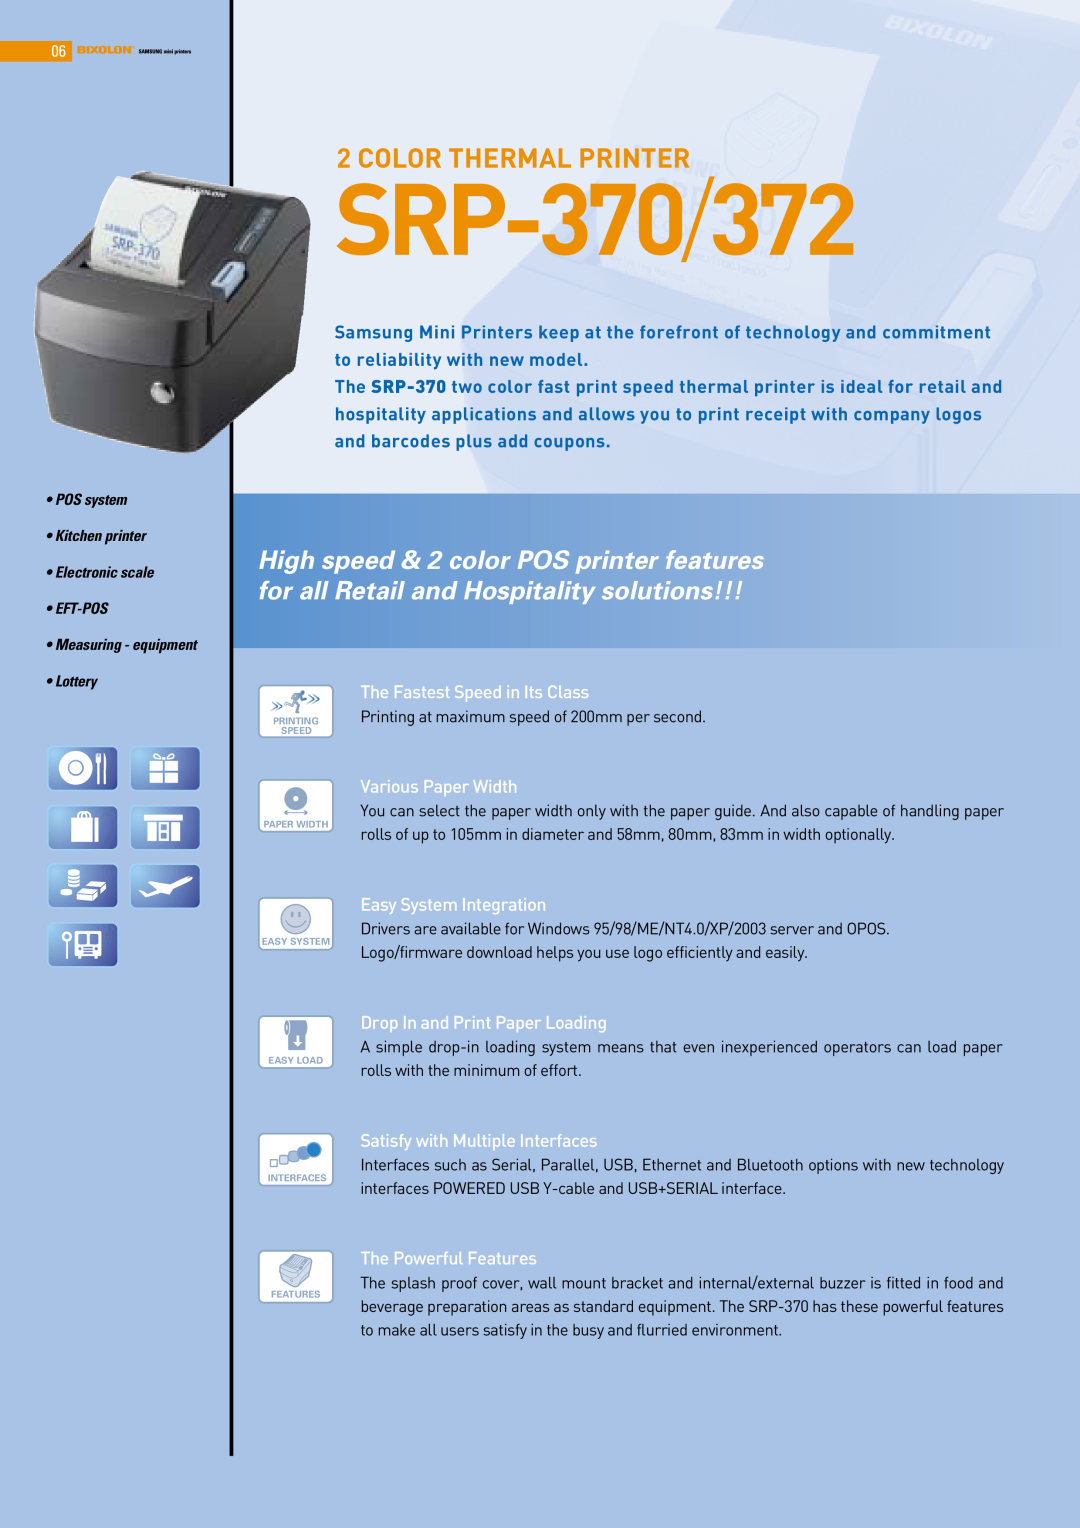 Samsung SRP-372, SRP-275 SRP-370/372, Color Thermal Printer, Easy System Integration, Drop In and Print Paper Loading 